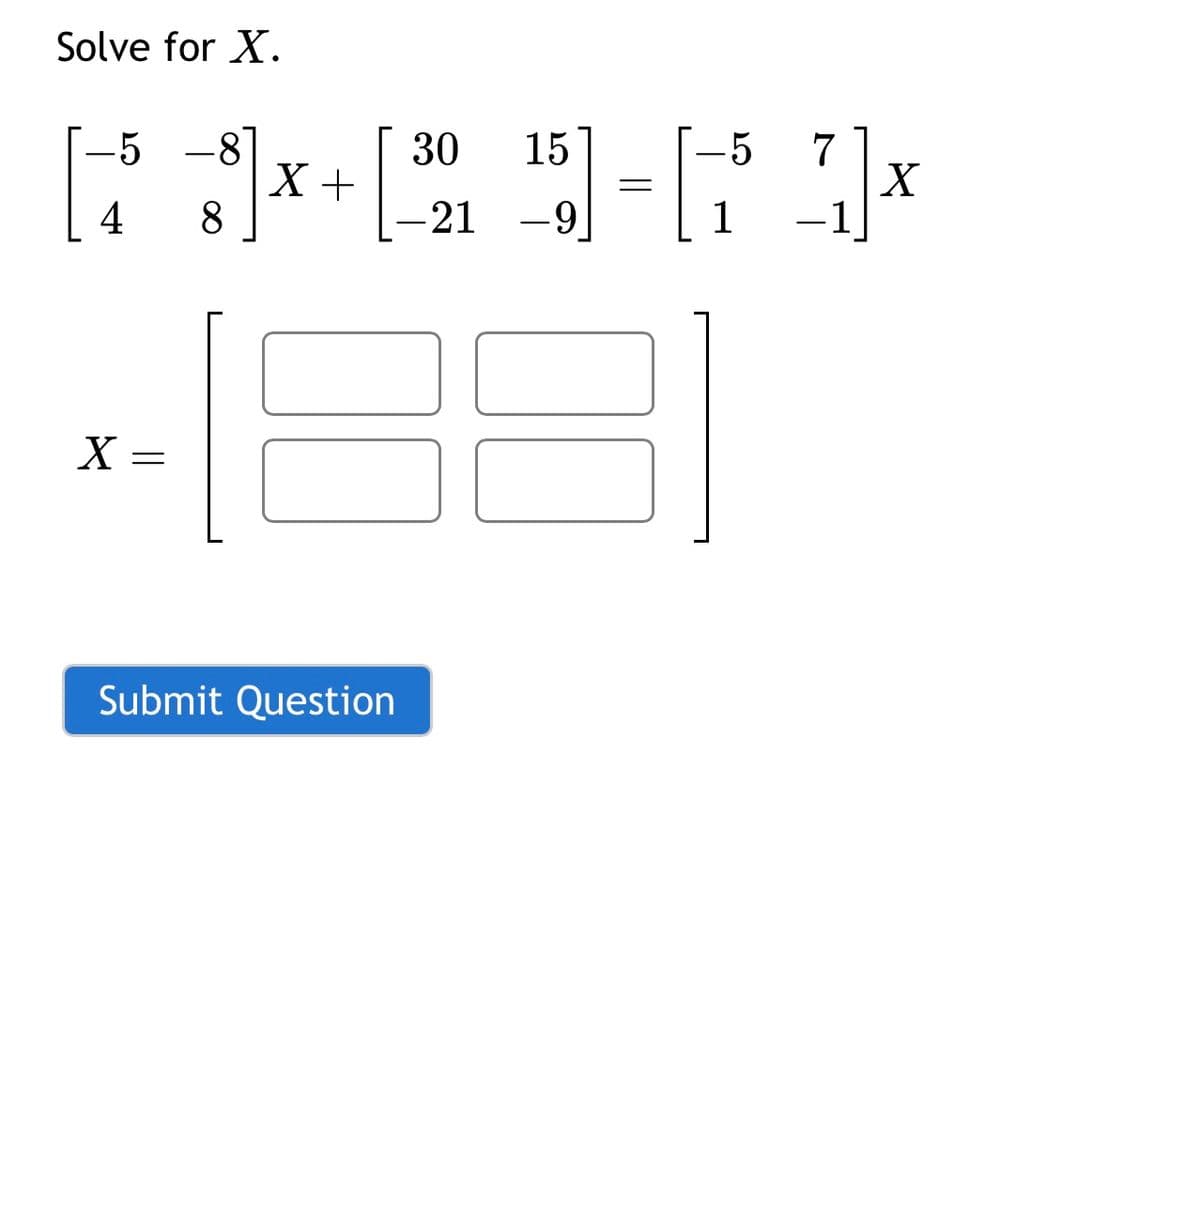 Solve for X.
-5
4
X =
-8
8
X +
Submit Question
30 15
-21
-9]
=
1x
X
-5 7
1 1